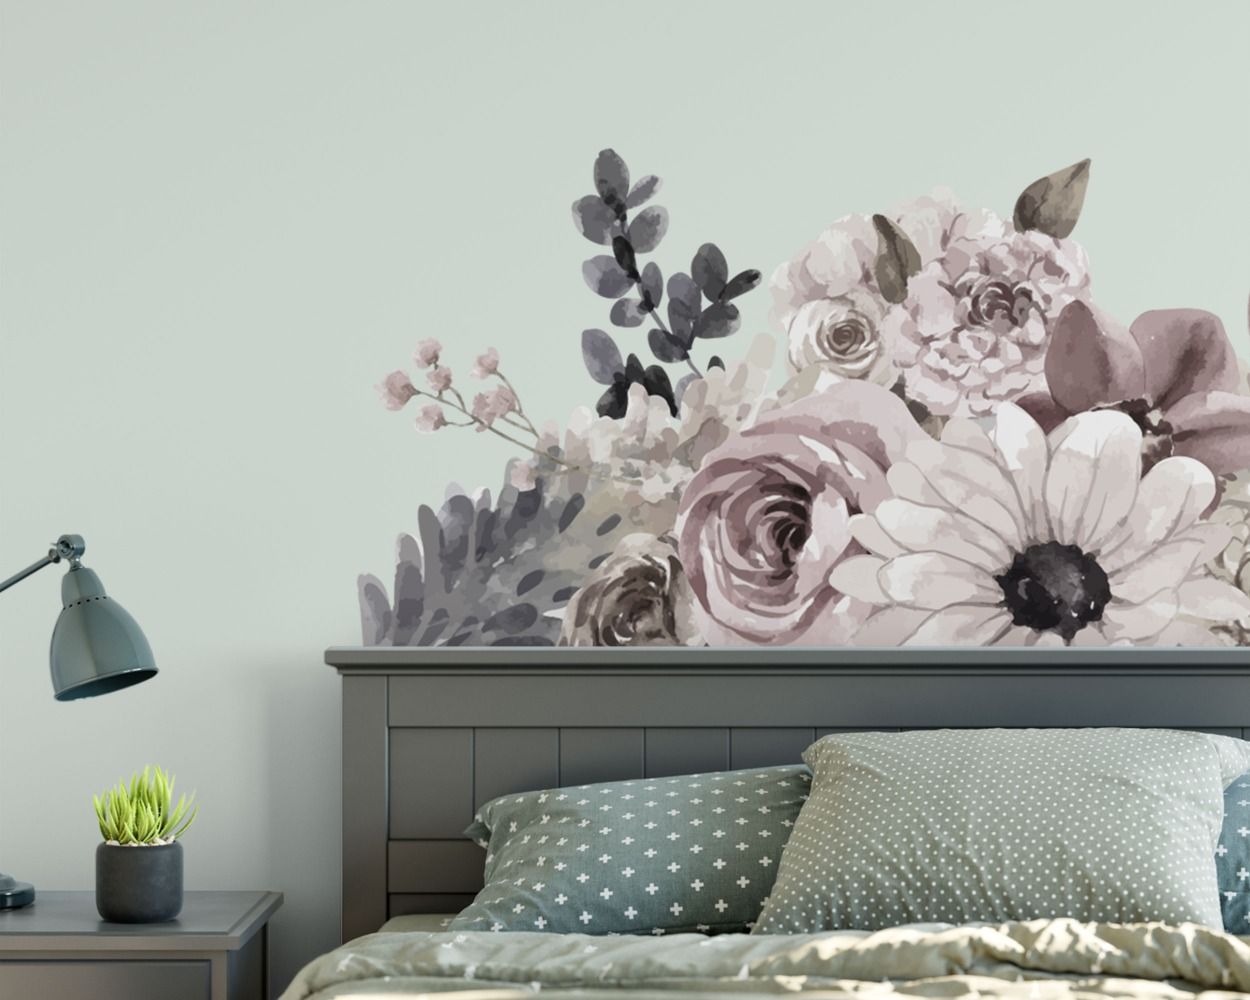 Best beautiful Pancy Floral Headboard Wall Stickers for bedroom wall decor